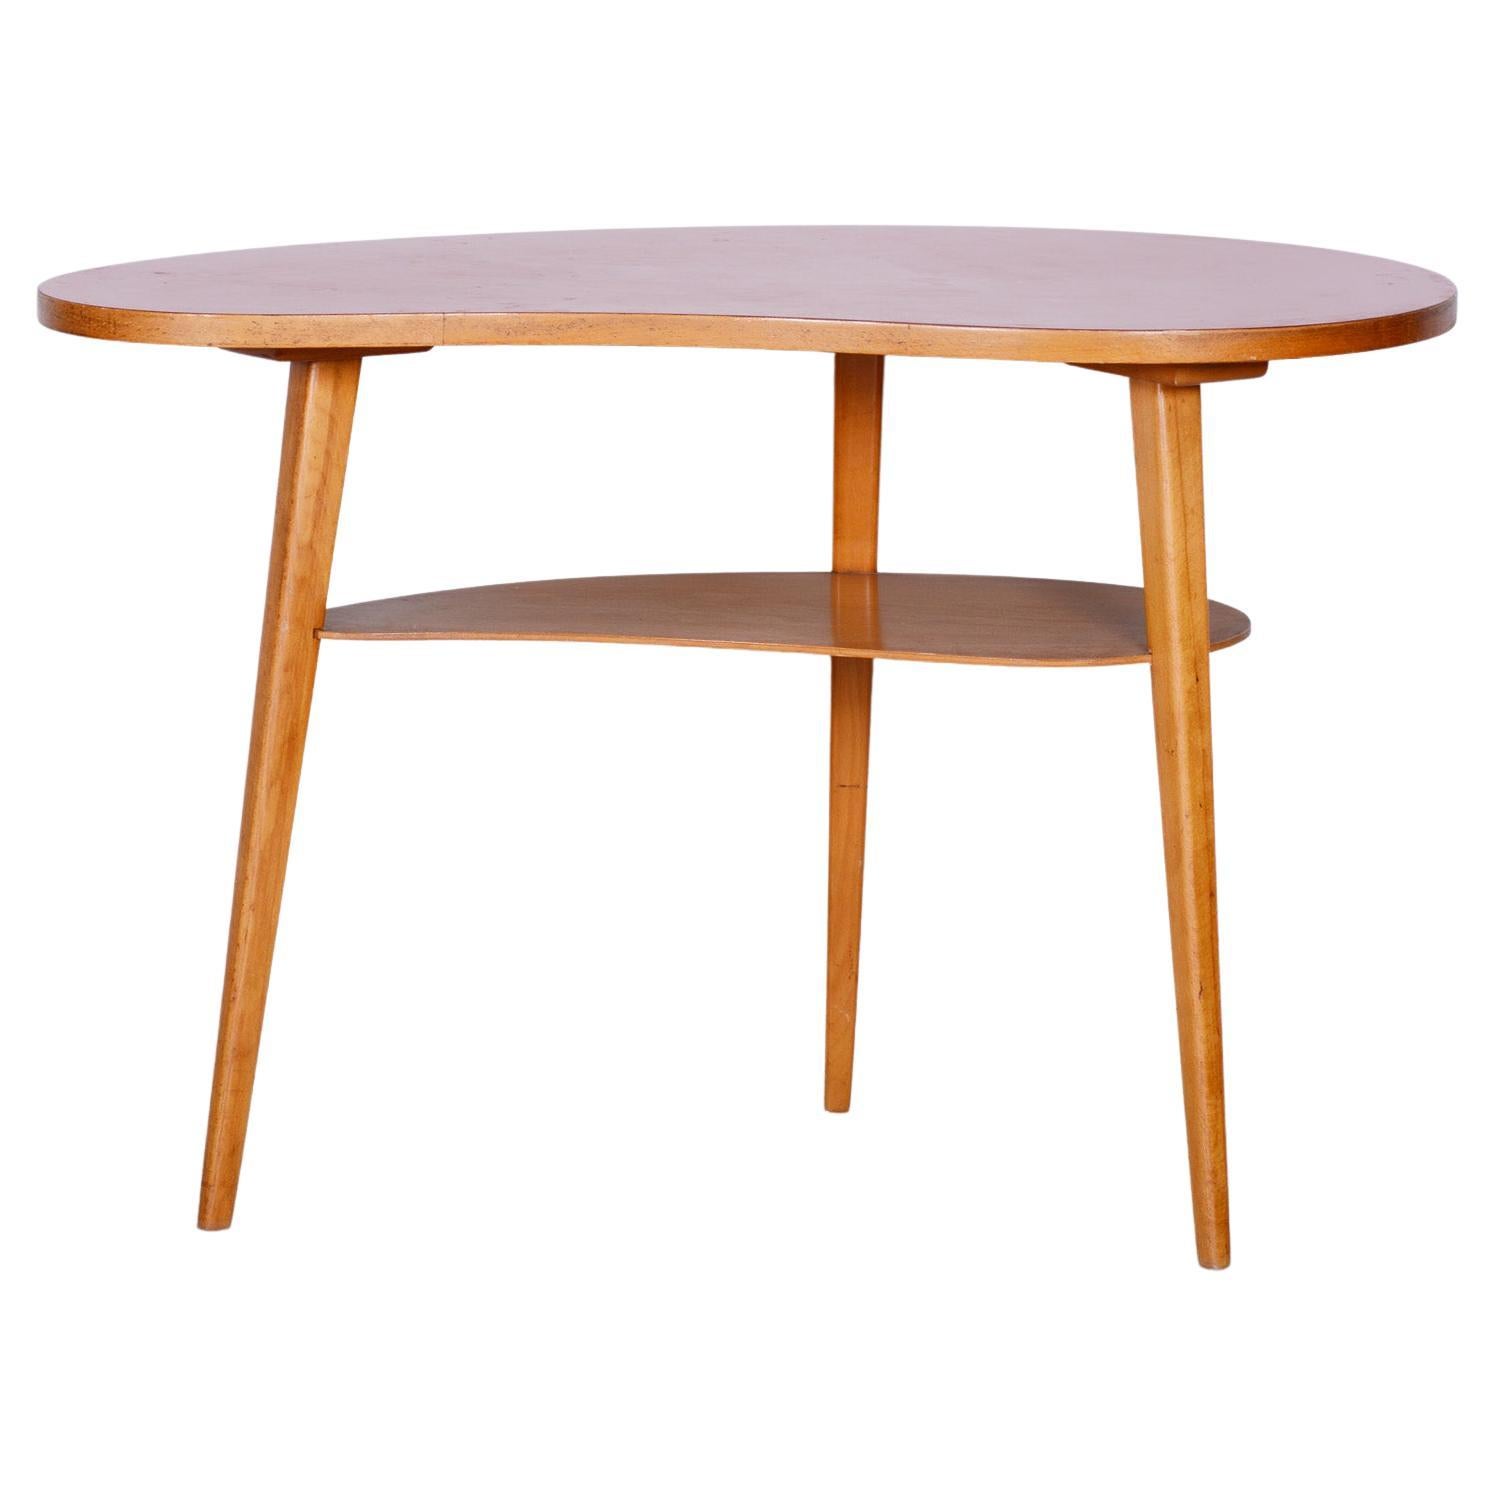 Small Beech Table, Czech Midcentury, Preserved in Original Condition, 1950s For Sale